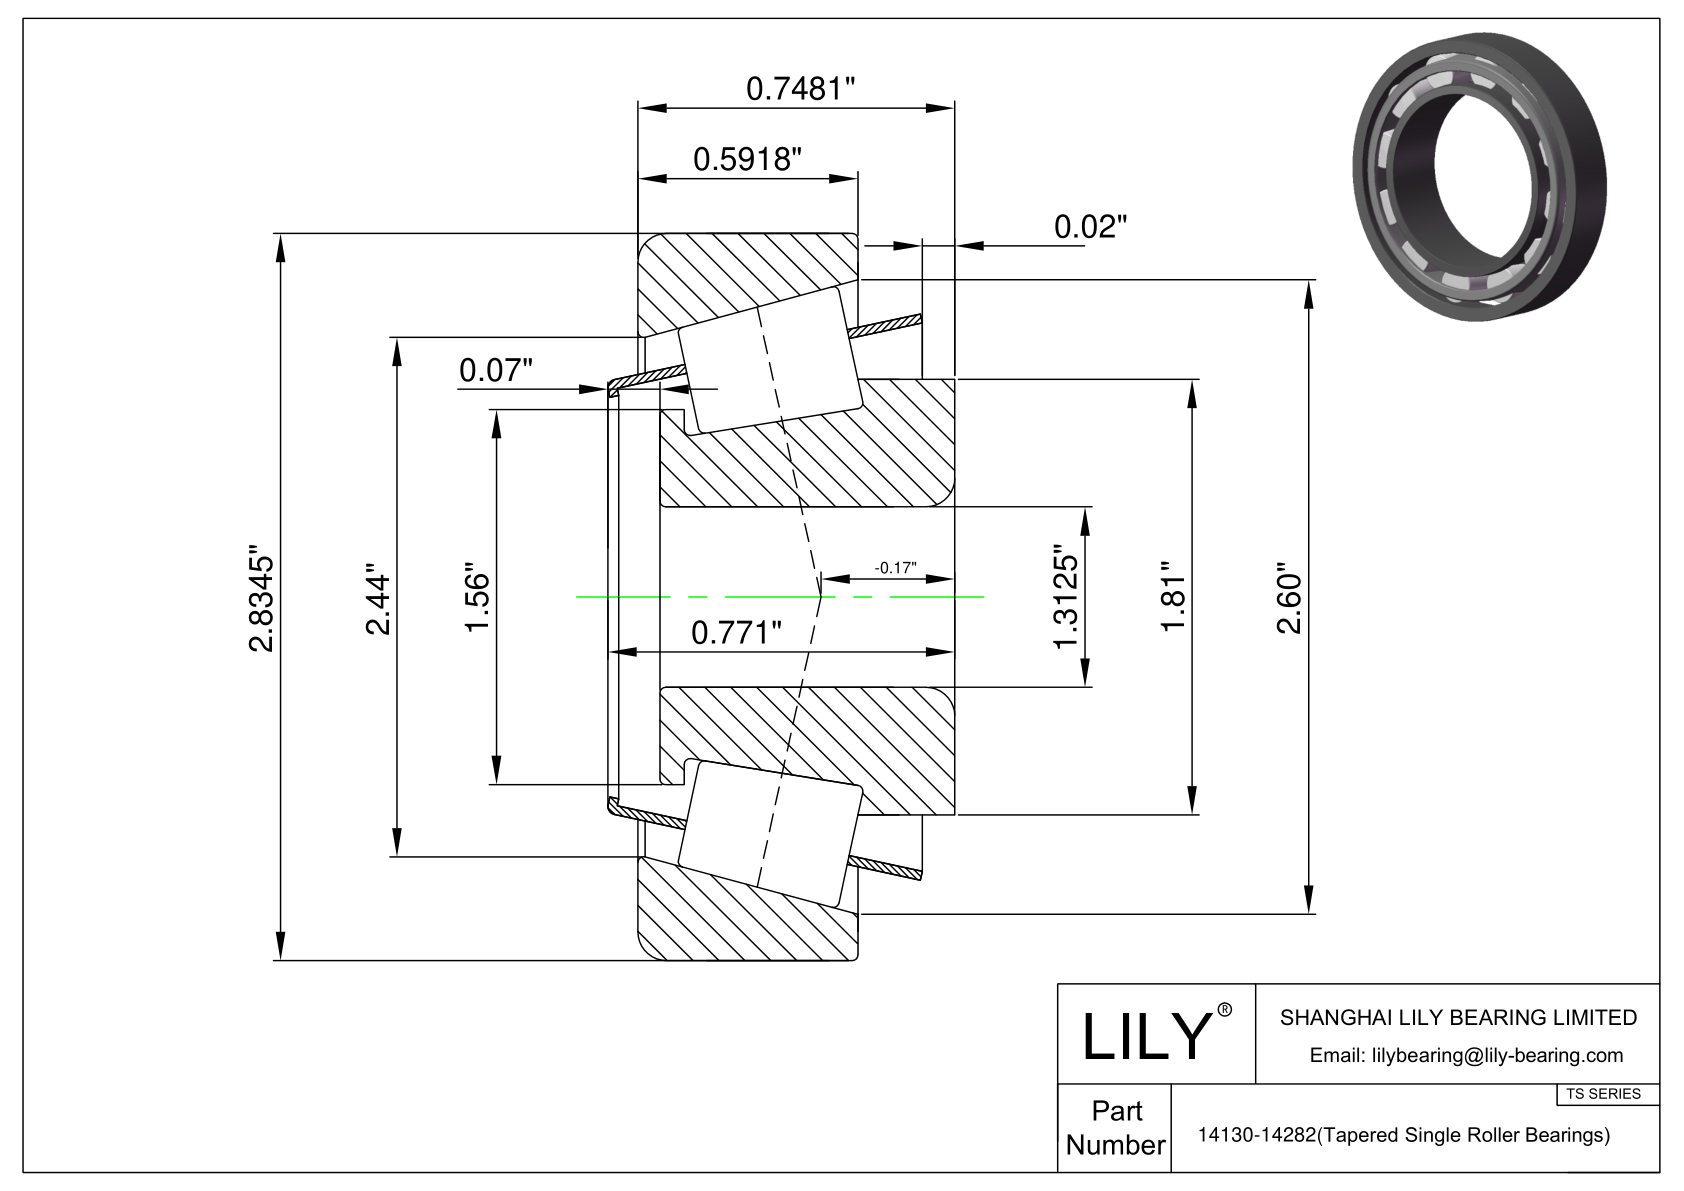 14130-14282 TS (Tapered Single Roller Bearings) (Imperial) cad drawing